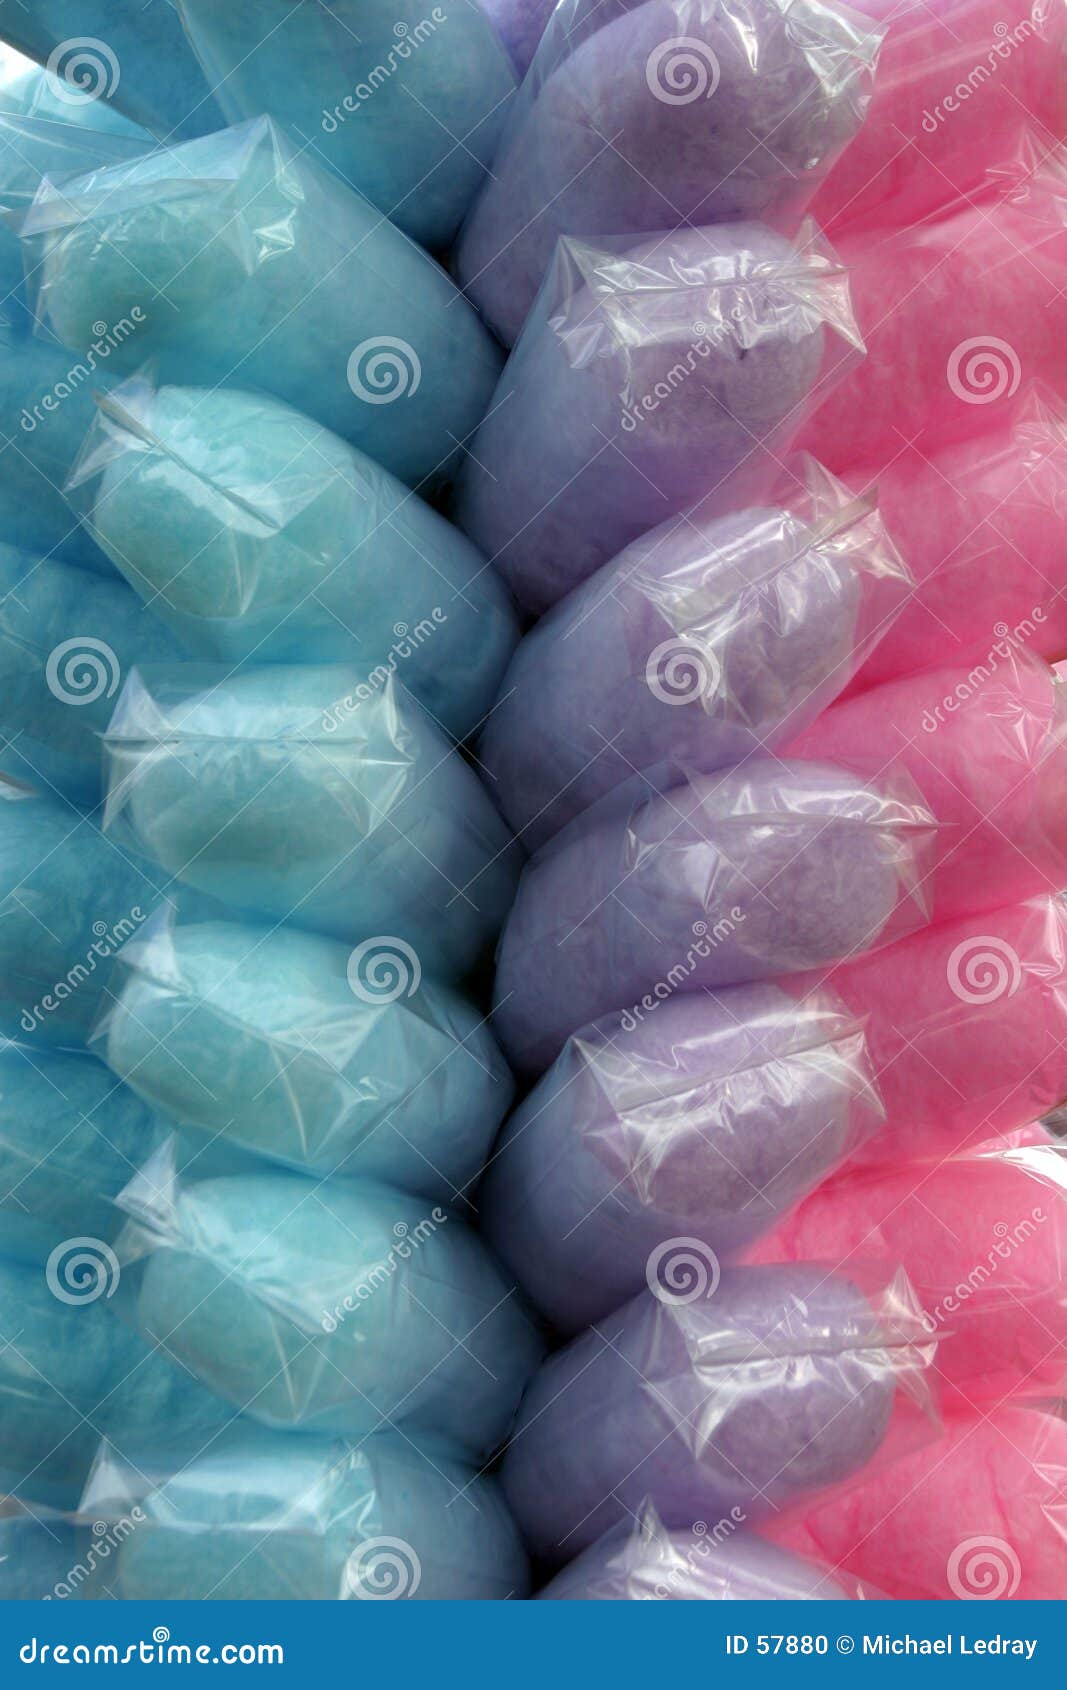 Cotton candy stock photo. Image of food, junk, cotton, blue - 57880